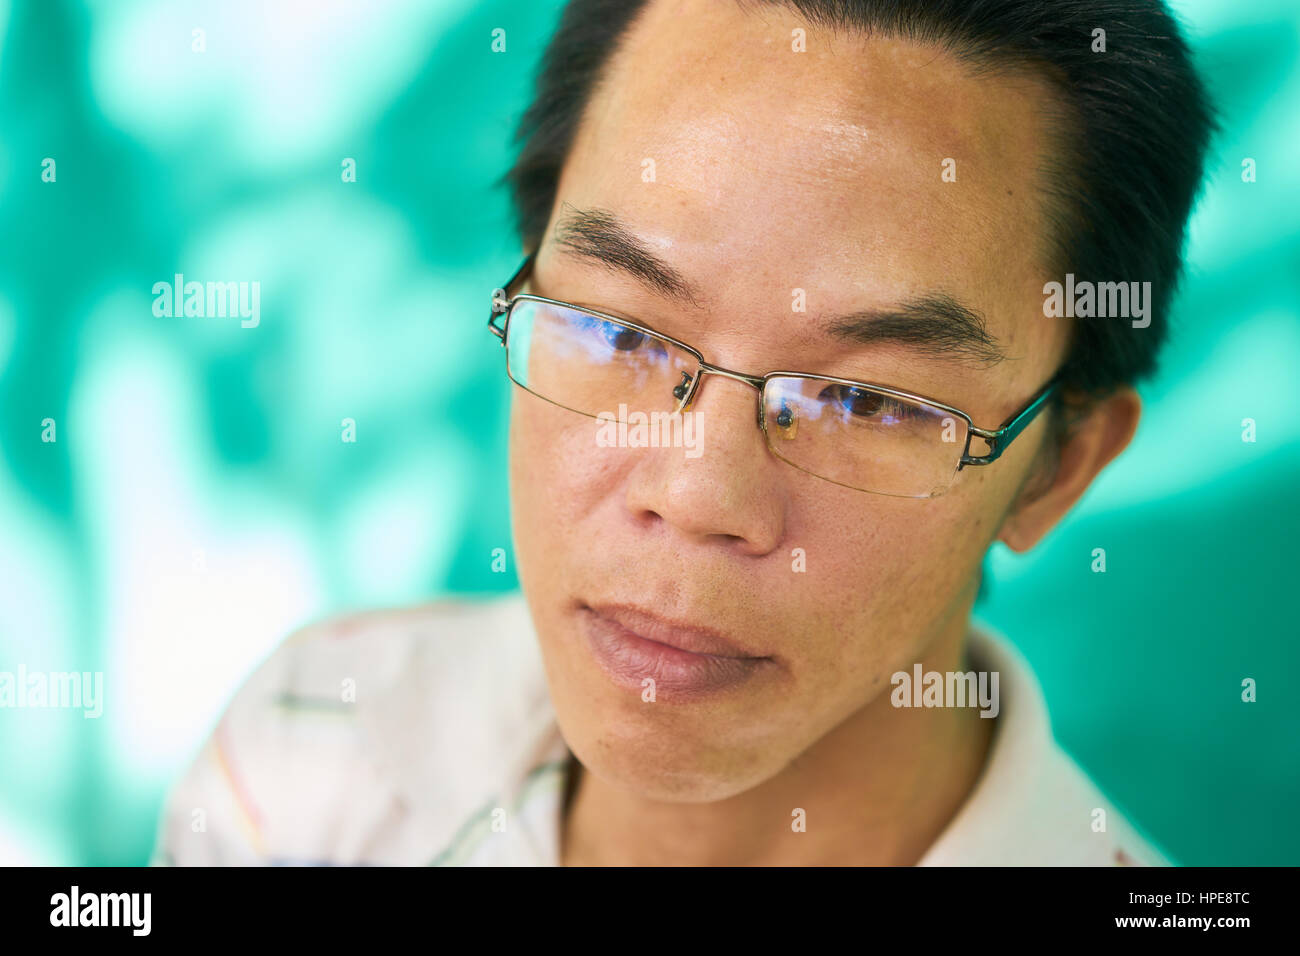 Real Cuban people with emotions and feelings, portrait of sad young asian-latino man with glasses from Havana, Cuba looking at camera. Multiethnic per Stock Photo